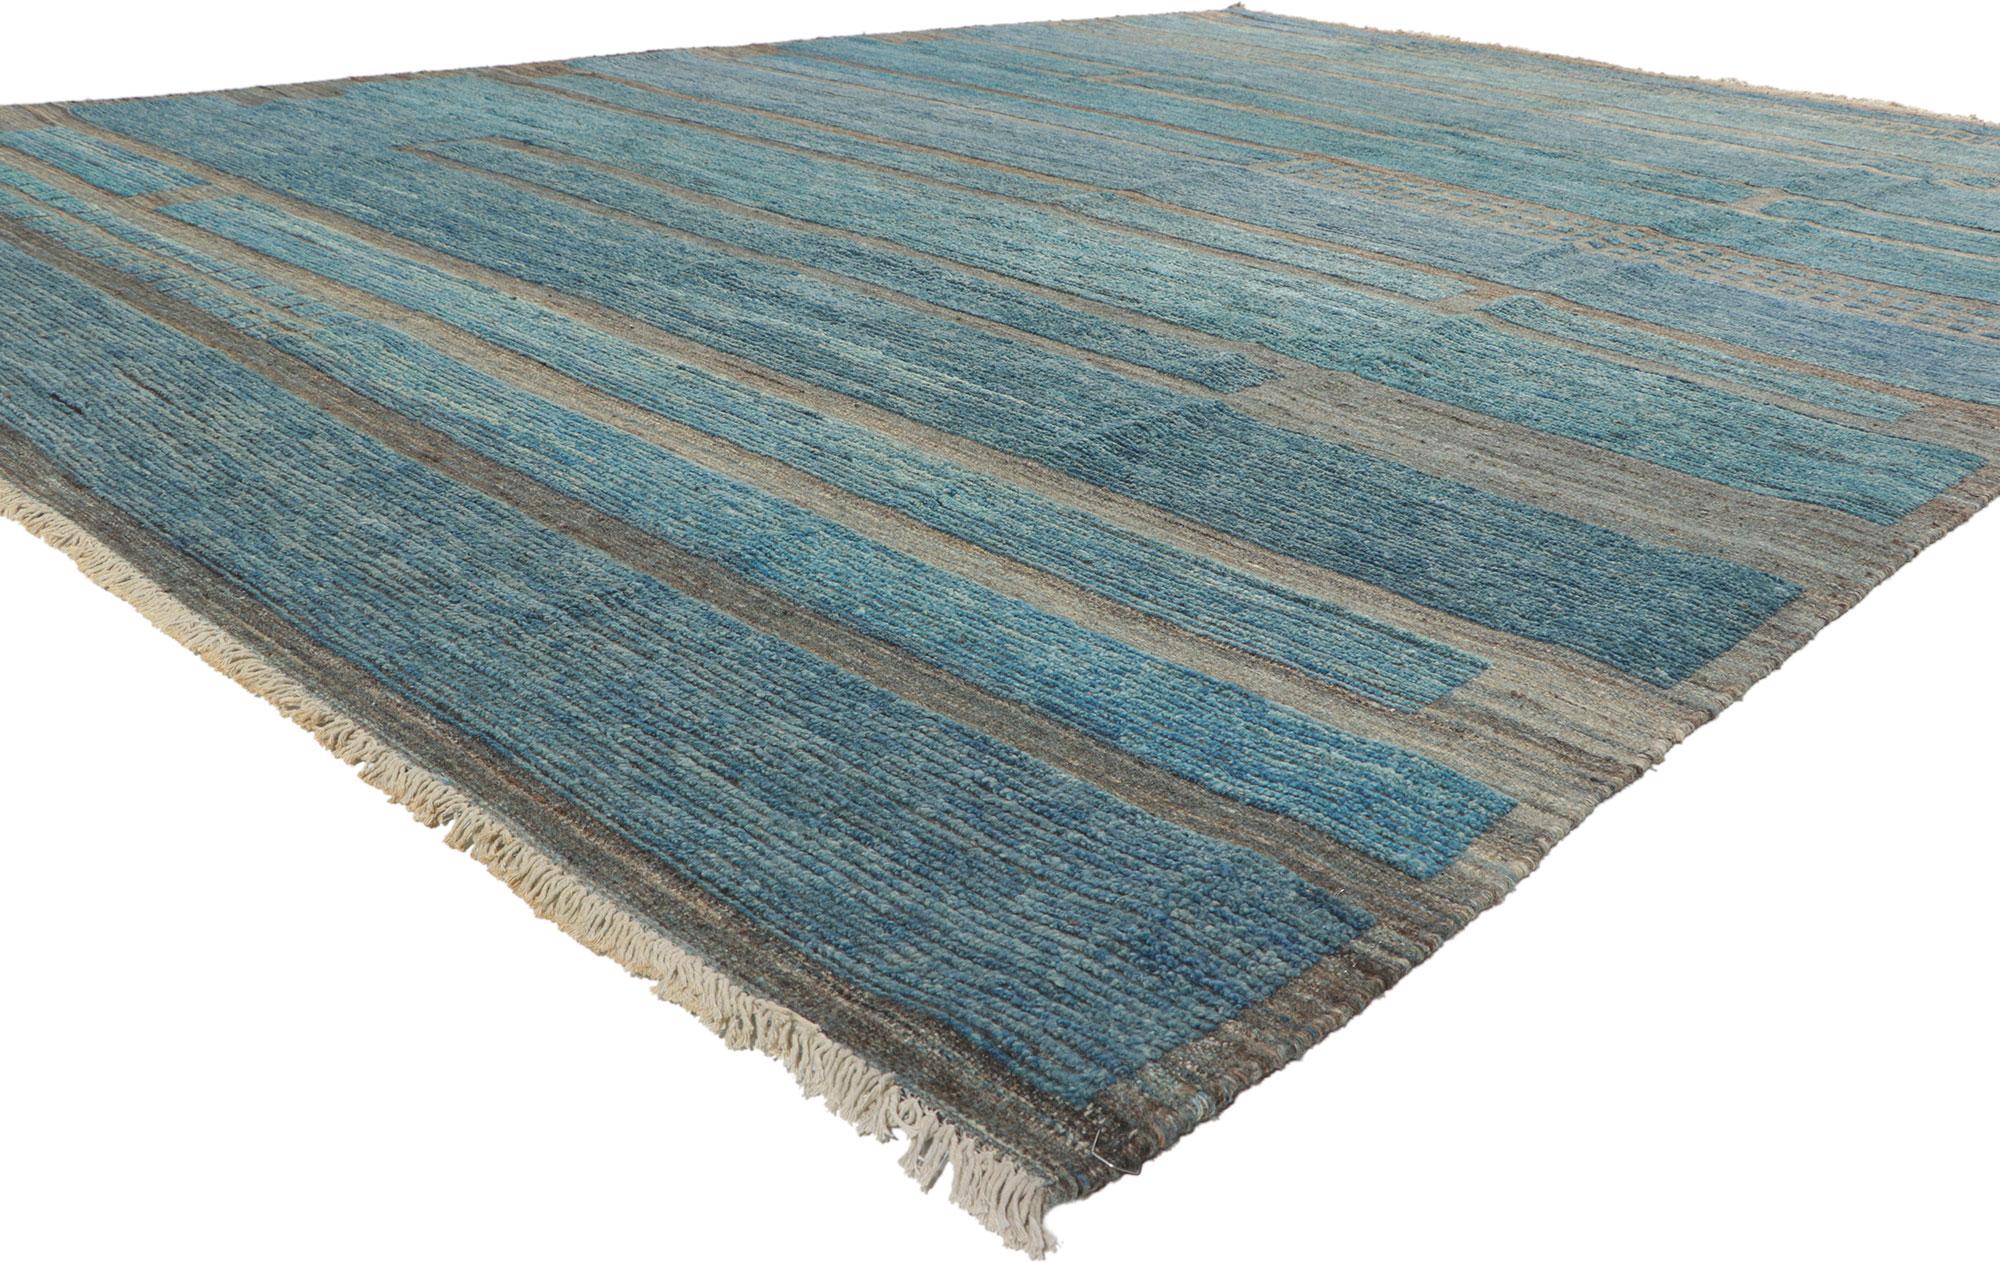 80947 Modern Style Moroccan rug, 09'06 x 12'10. Showcasing an expressive design, incredible detail and texture, this hand knotted wool contemporary Moroccan area rug is a captivating vision of woven beauty. The textures and lines hark back to the